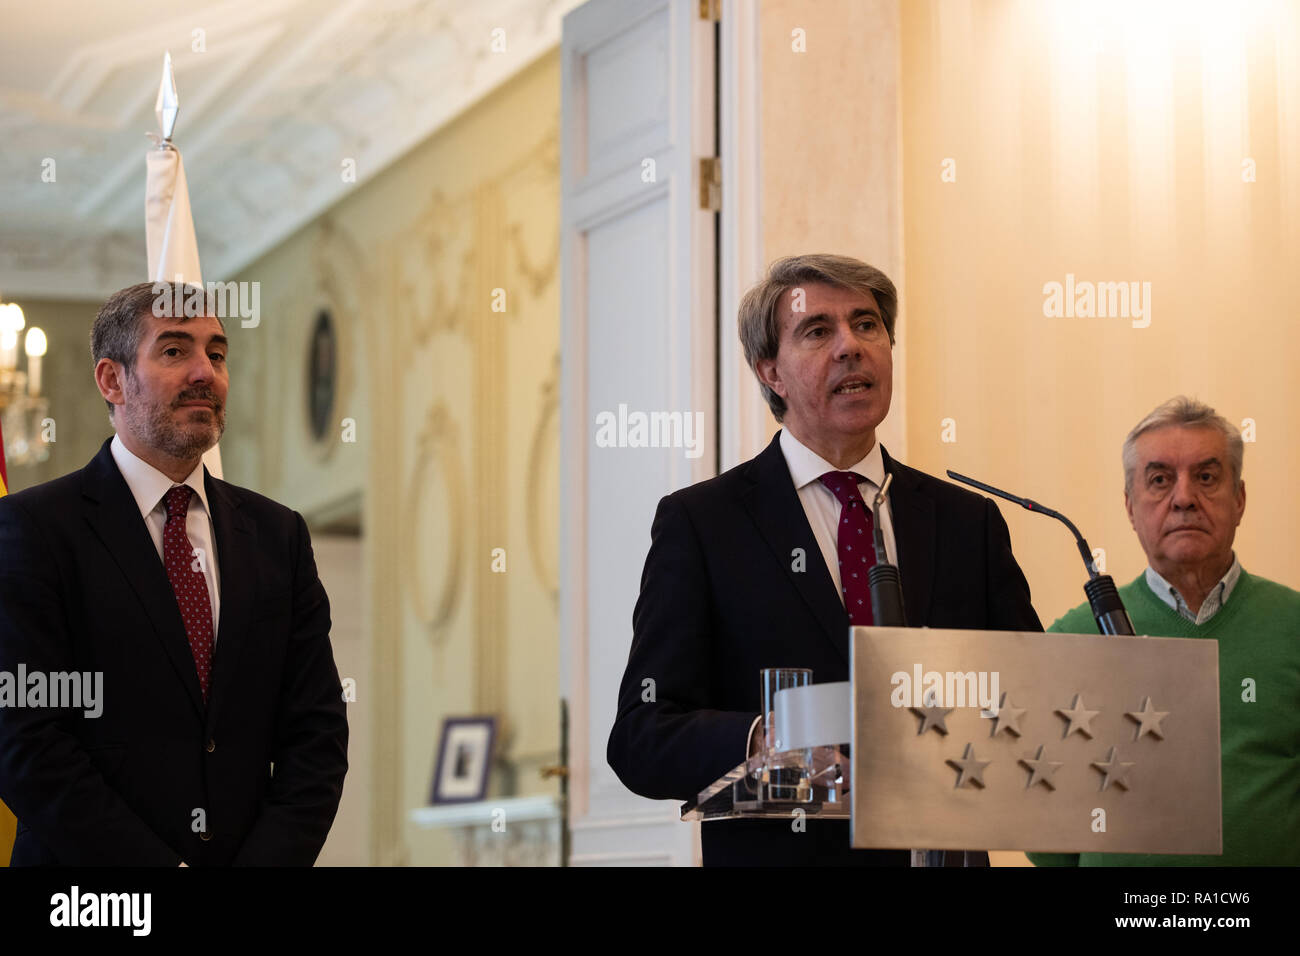 Madrid, Spain. 30th December 2018. FERNANDO CLAVIJO, The President of the Community of the Canary Islands, ANGEL GARRIDO(left), The President of the Community of Madrid and JESUS LOPEZ, watchmaker of Puerta del Sol.. The president of the Community of Madrid, Ángel Garrido, has met with his Canarian counterpart, Fernando Clavijo, to review the latest preparations for the New Year bells, which tomorrow will offer the clock of Puerta del Sol and this year will sound also in the Canary spindle on Dec 30, 2018 in Madrid, Spain Credit: Jesús Hellin/Alamy Live News Stock Photo